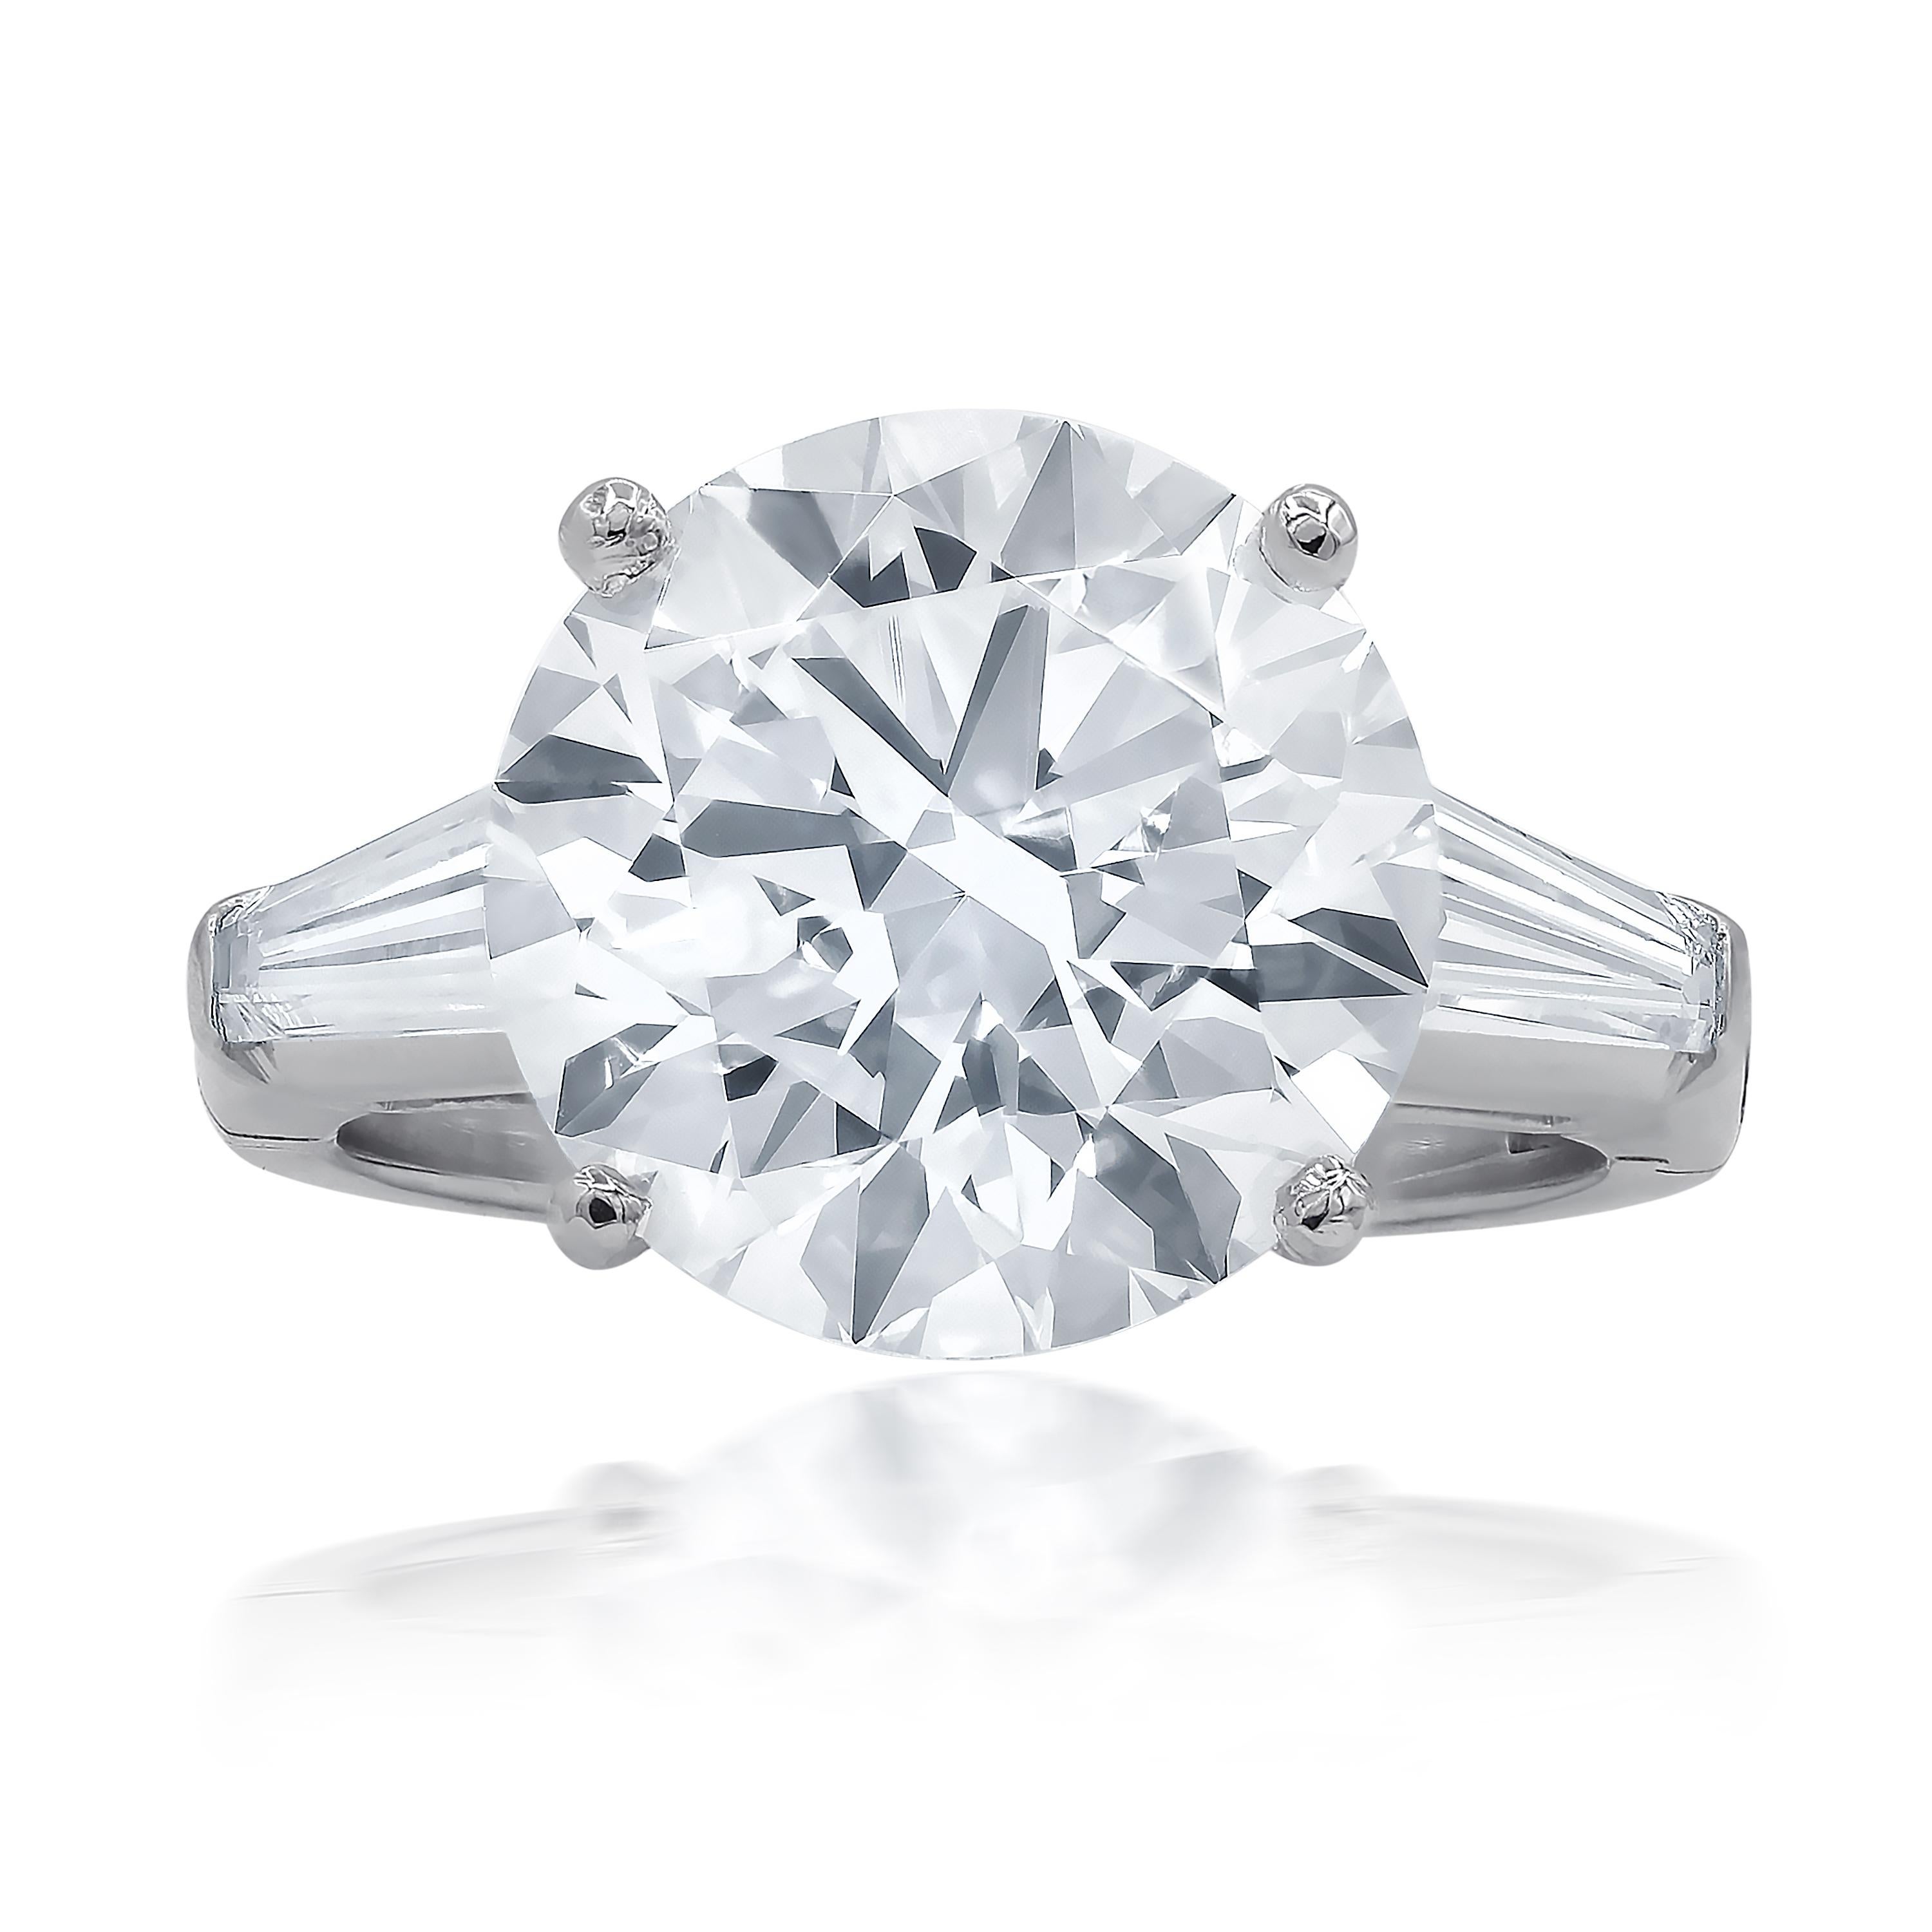 Platinum engagement ring features 7.01 carat of round diamond I-vs2 (rdc3278) and 1.00 ct baguette on the sides.
